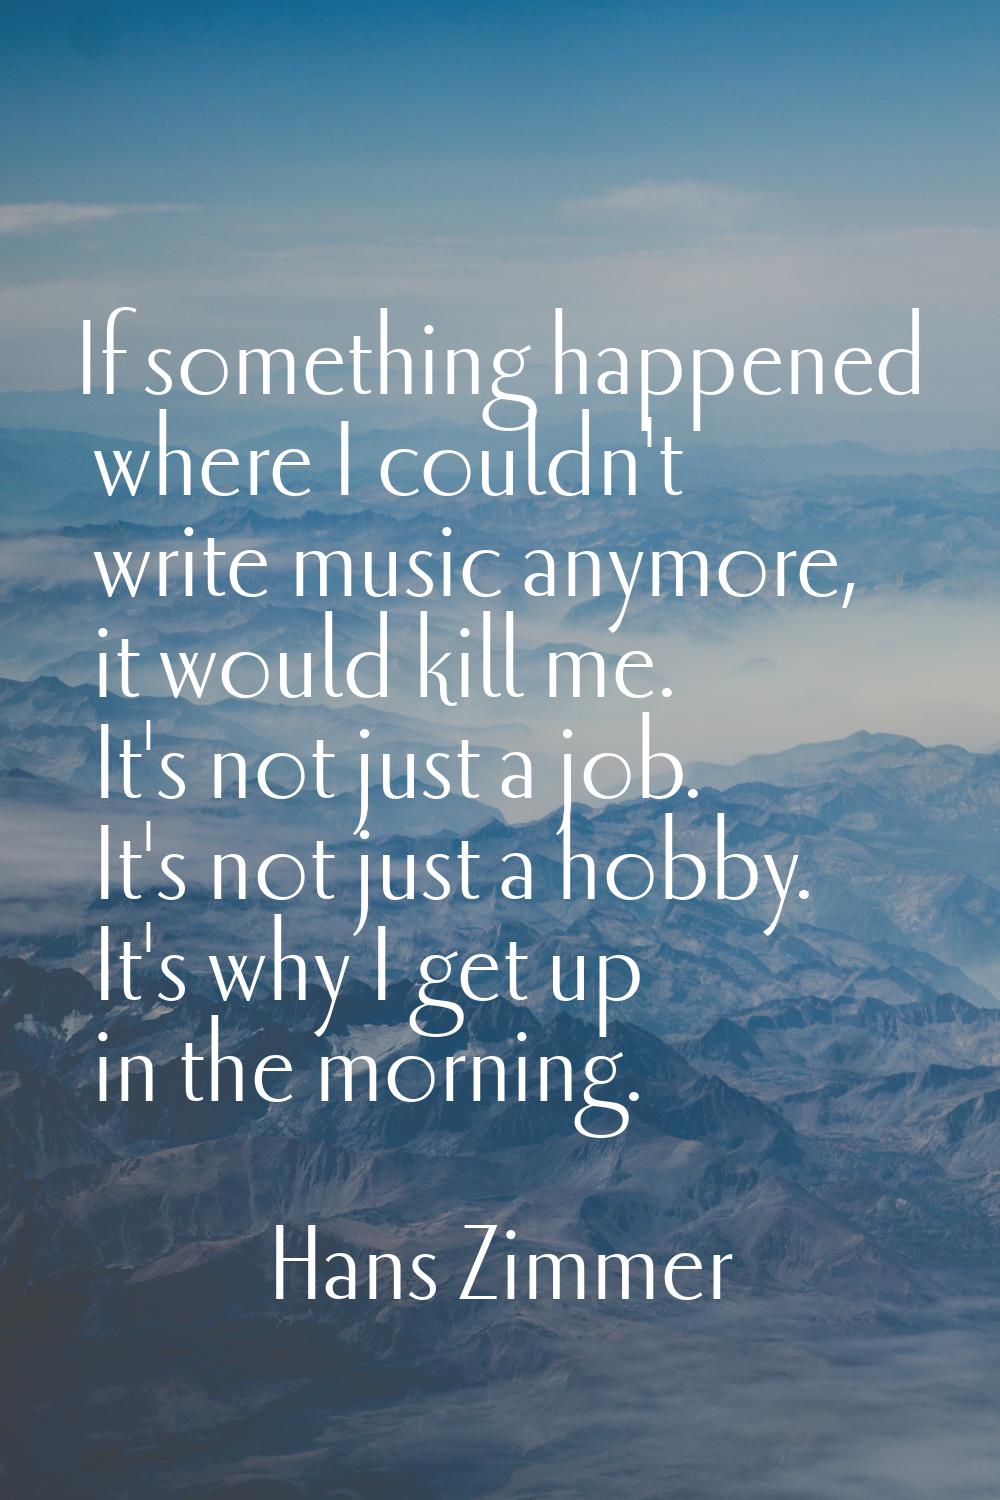 If something happened where I couldn't write music anymore, it would kill me. It's not just a job. 